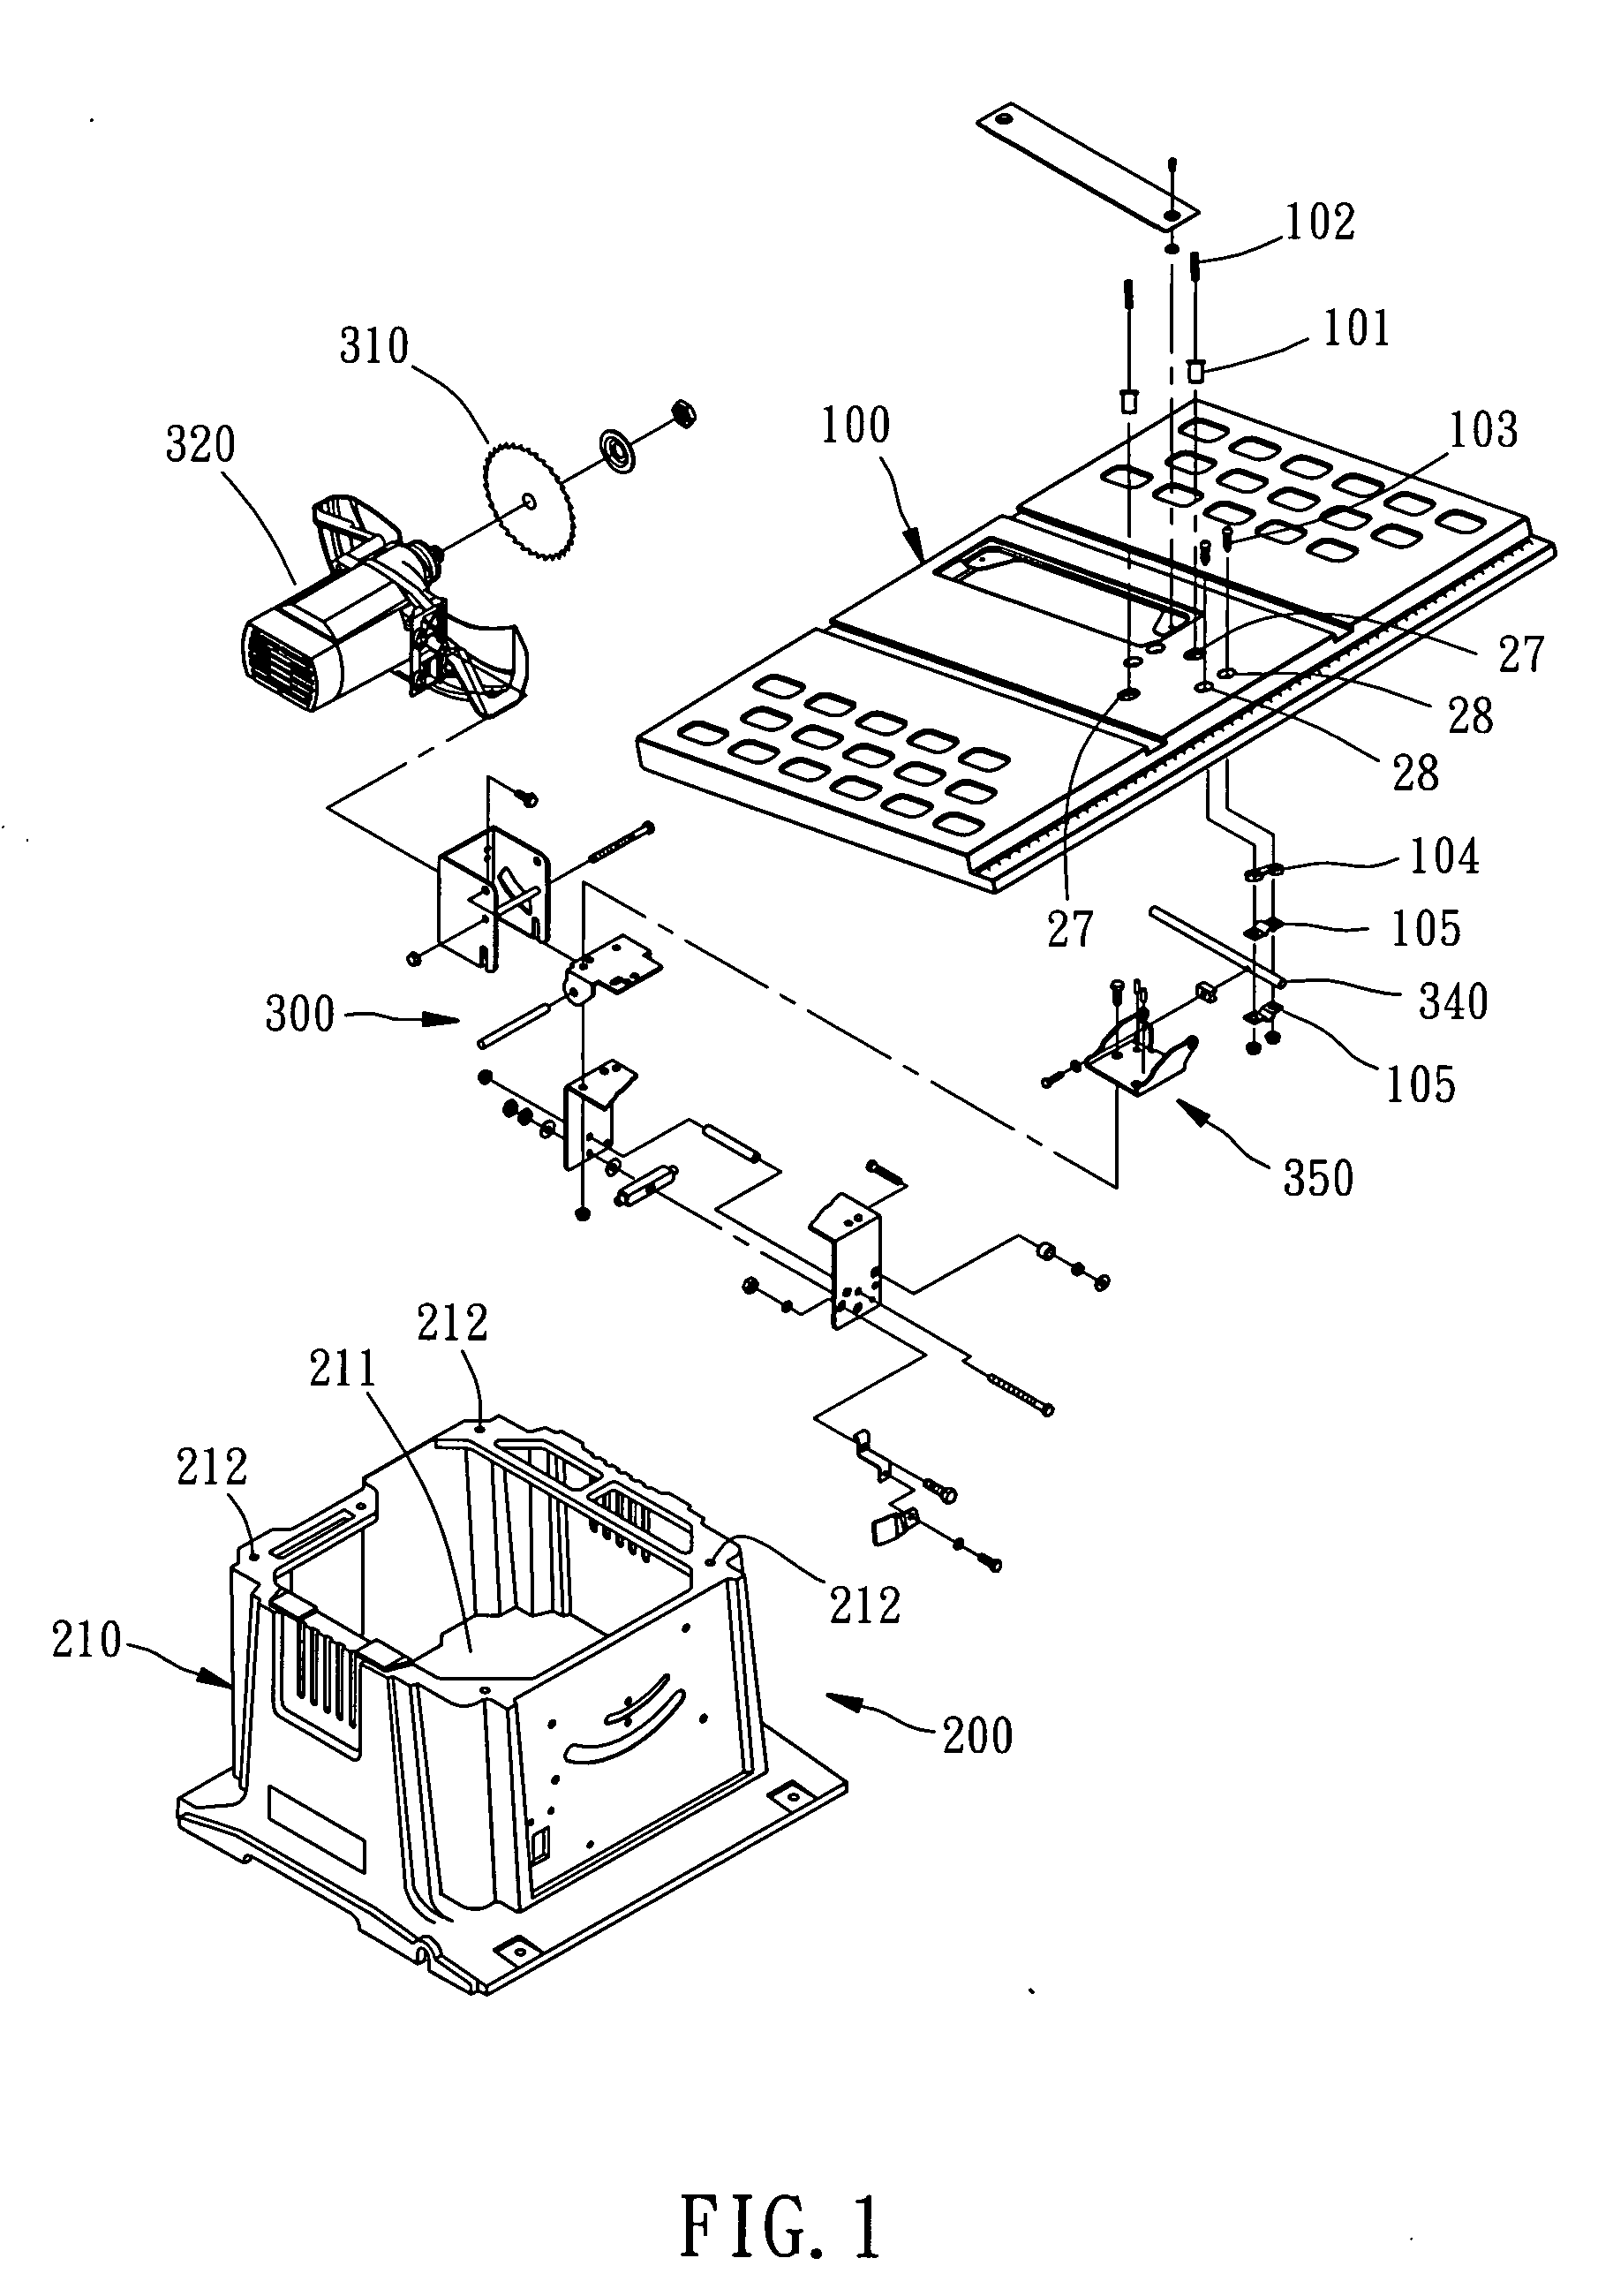 Worktable of a table saw